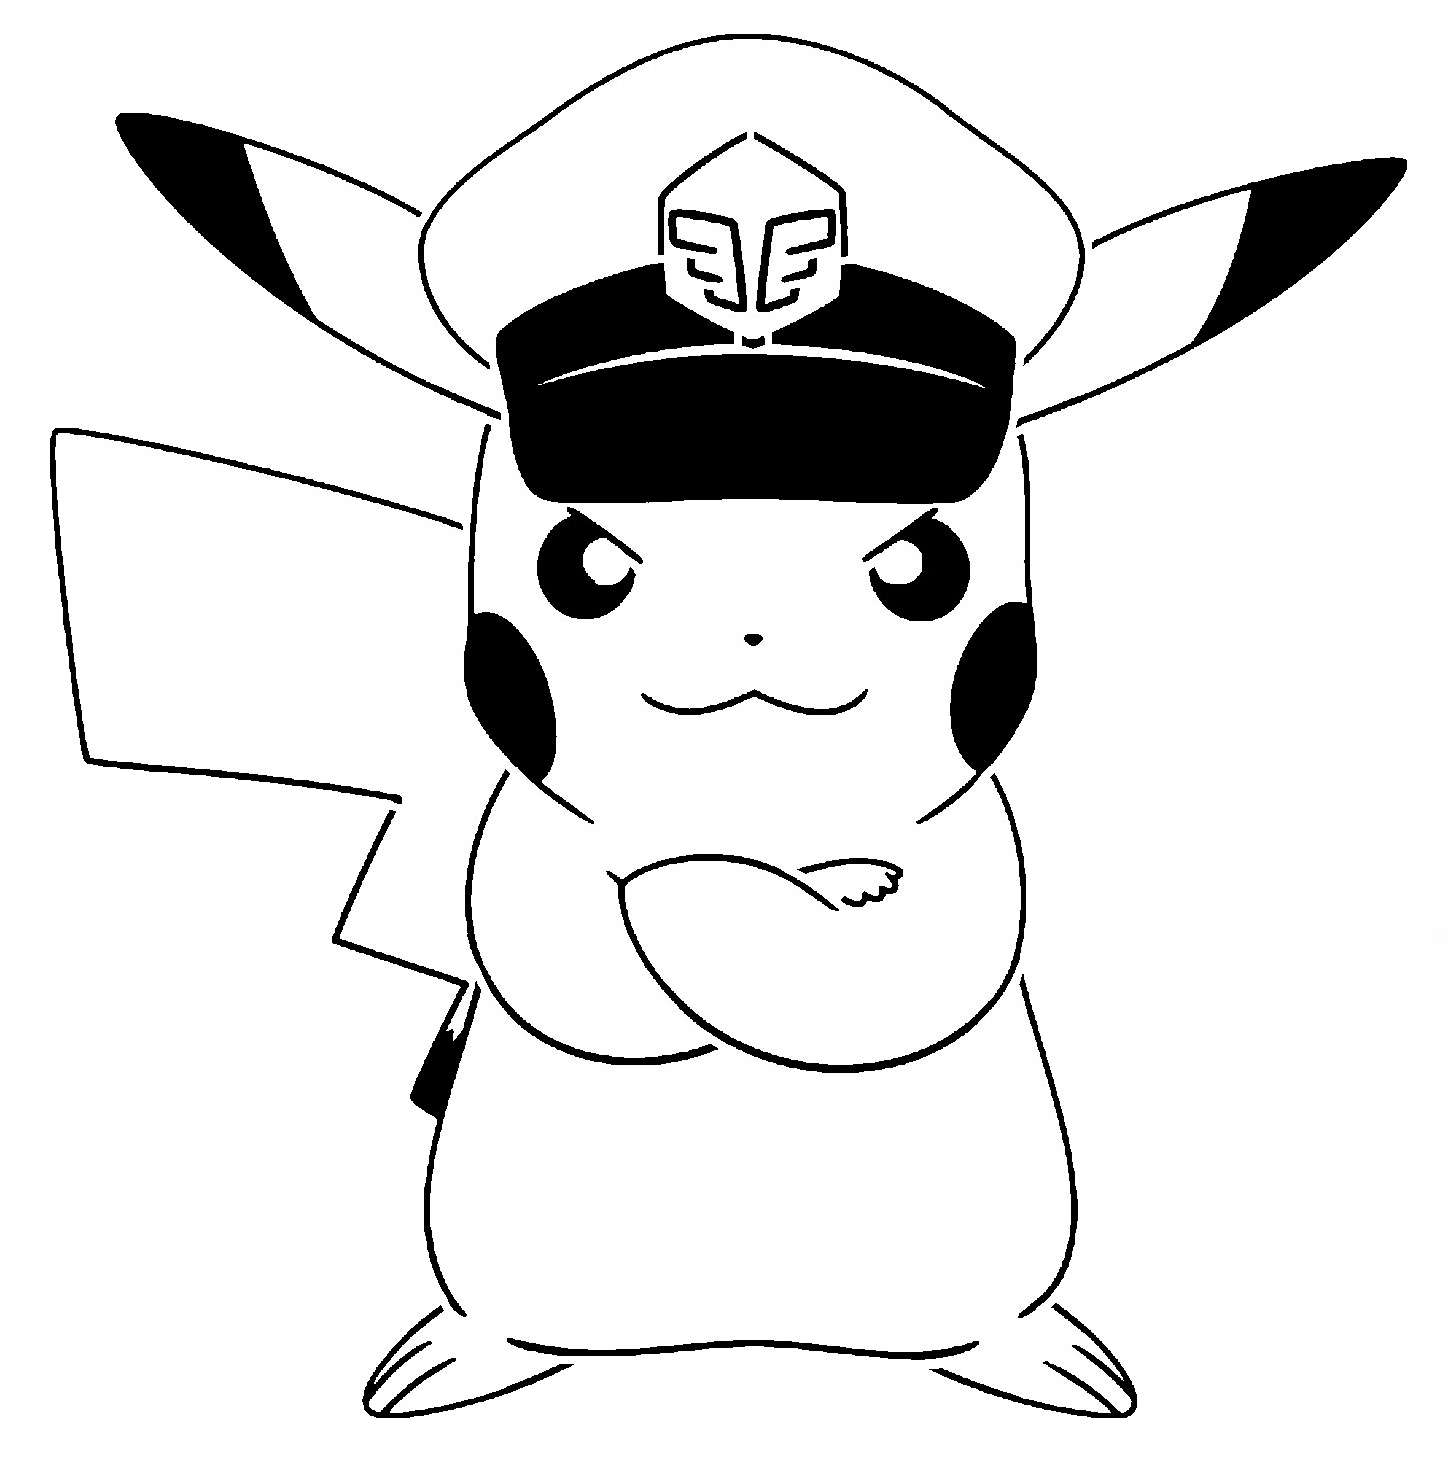 Captain pikachu stencil by longquang on